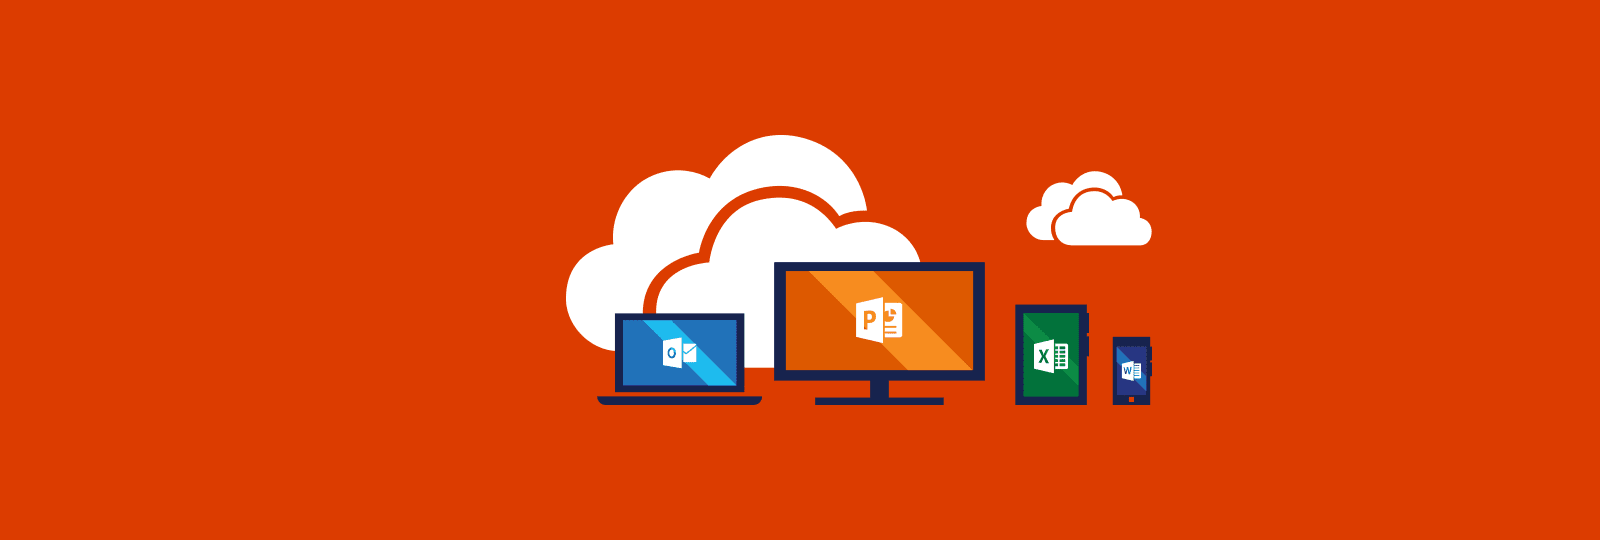 Microsoft Office 365 across devices